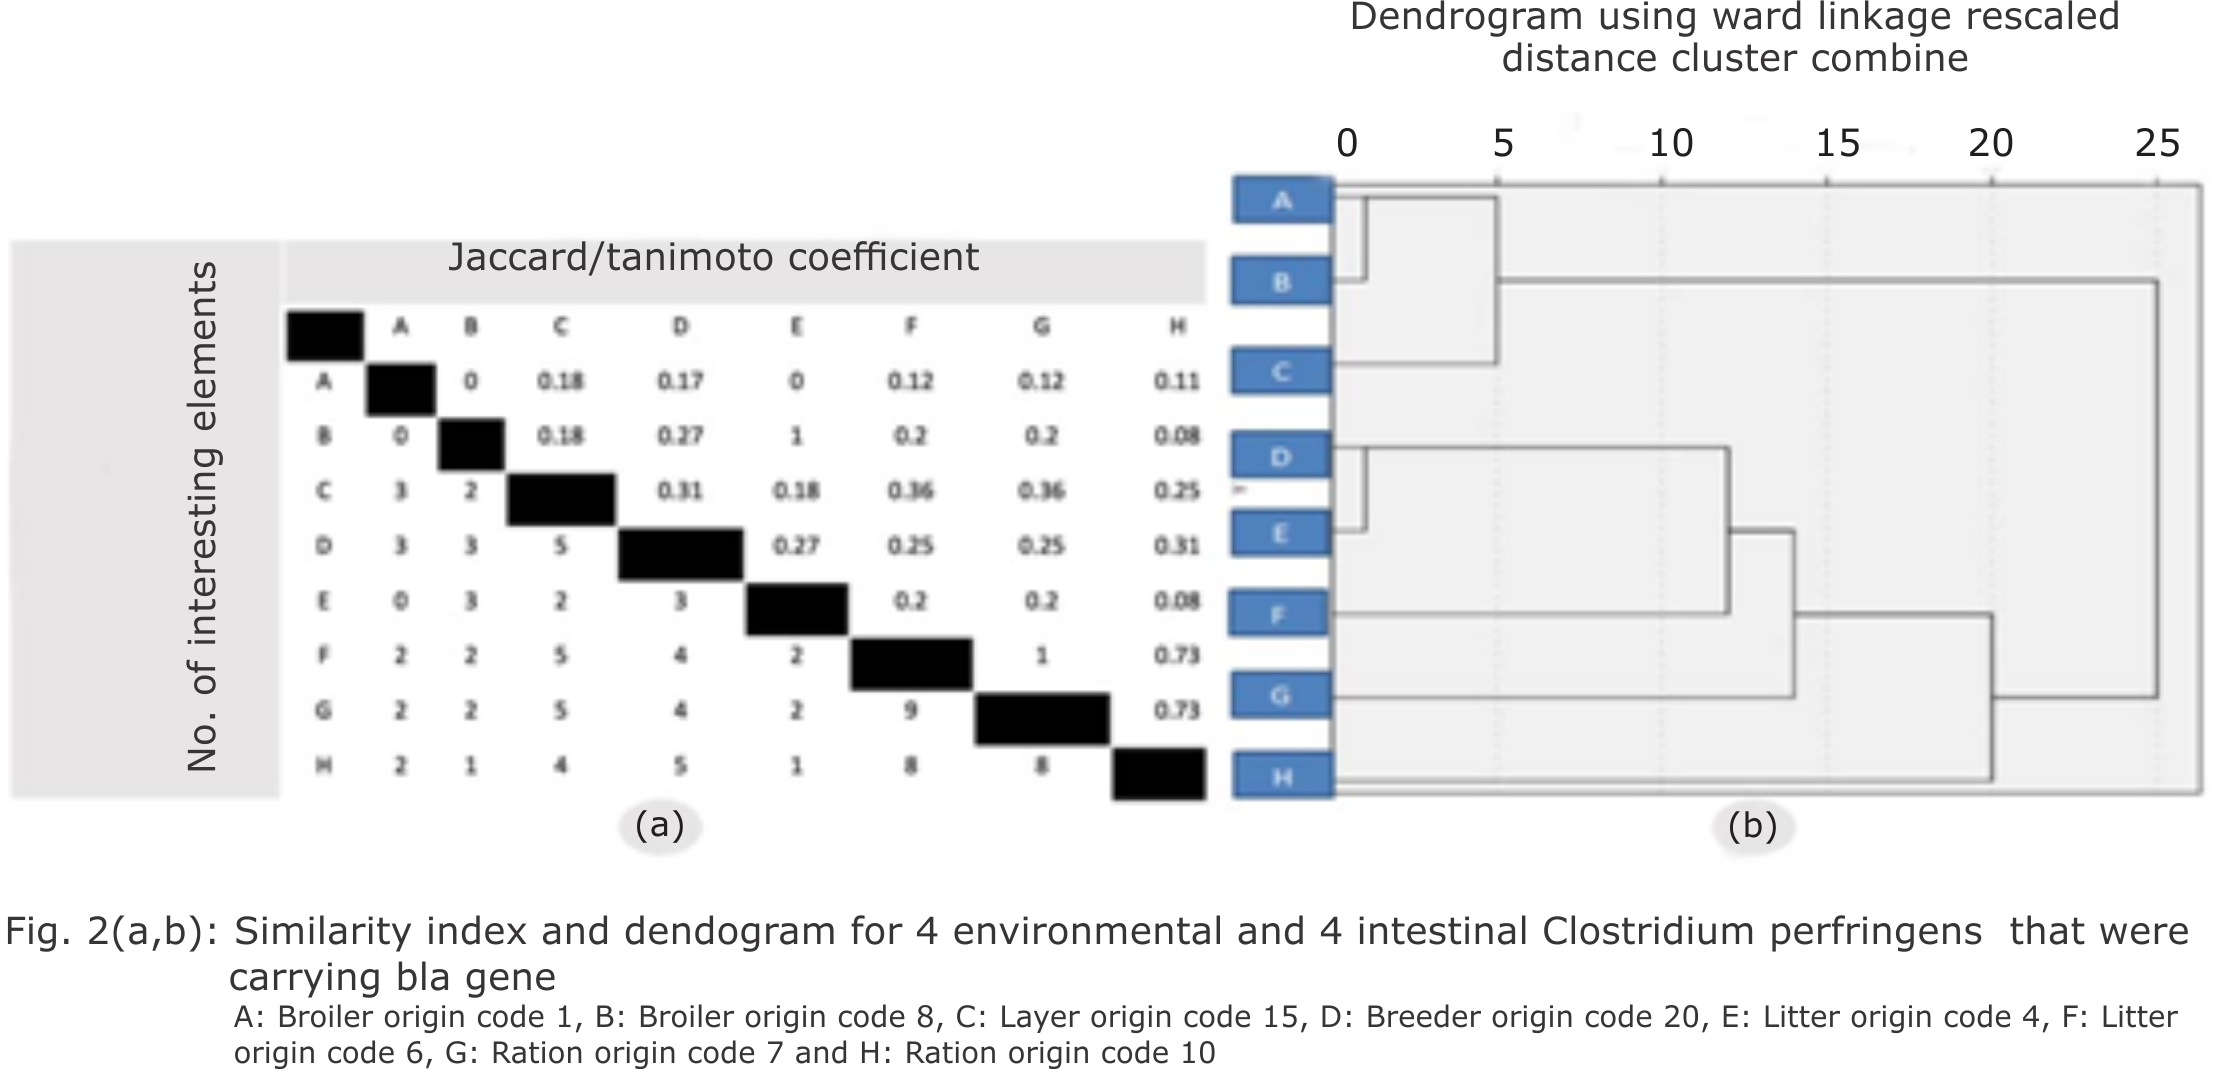 Fig. 2: Similarity index and dendogram for 4 environmental and 4 intestinal Clostridium perfringens that were carrying bla gene